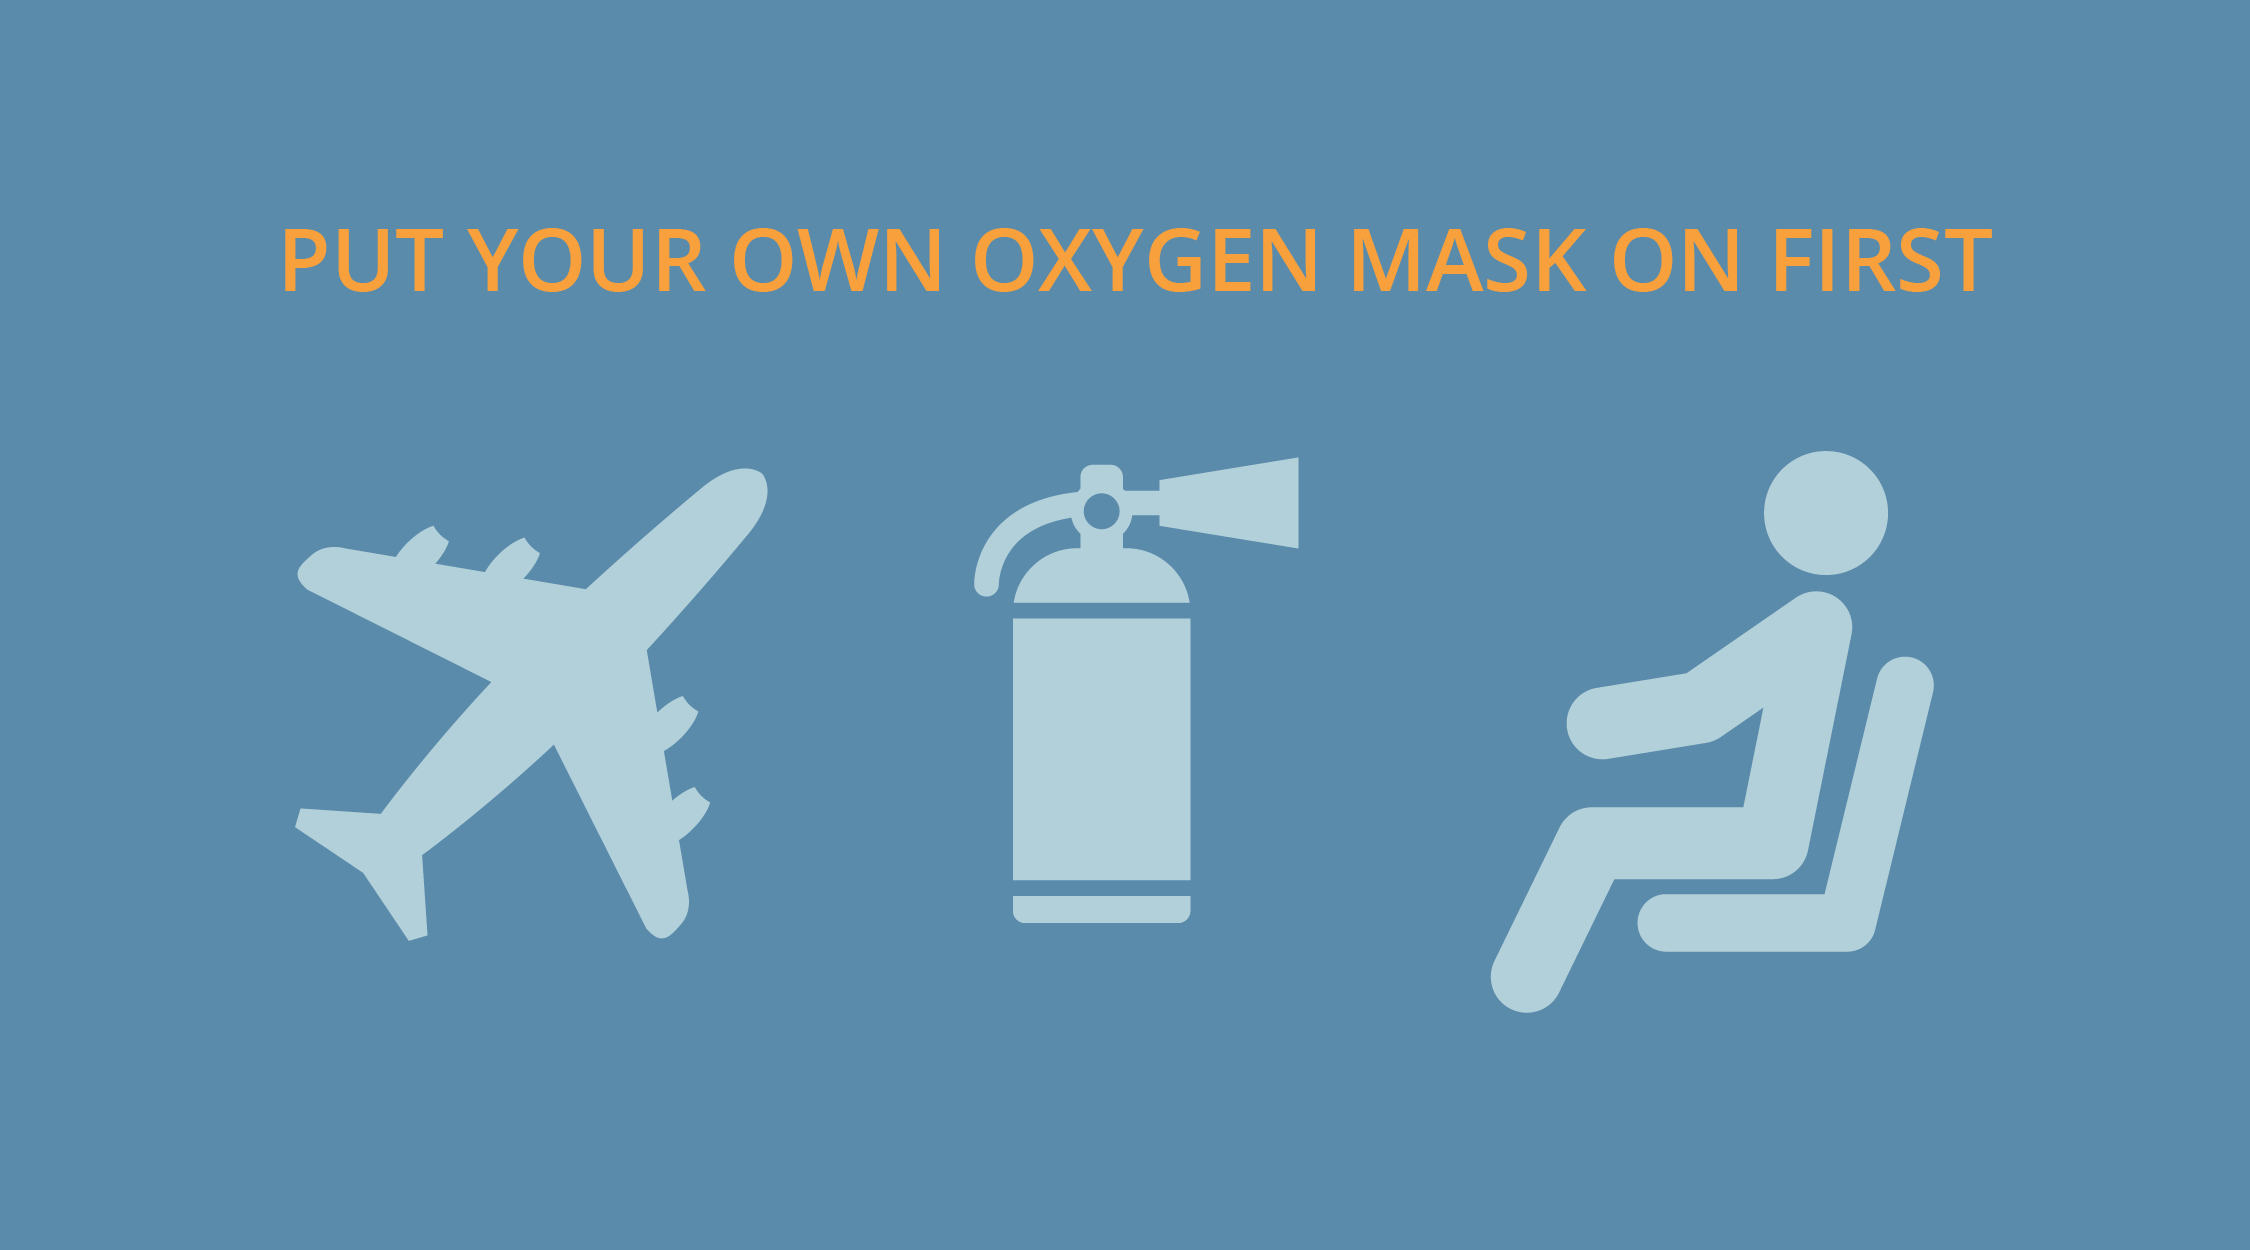 Put your own oxygen mask on first